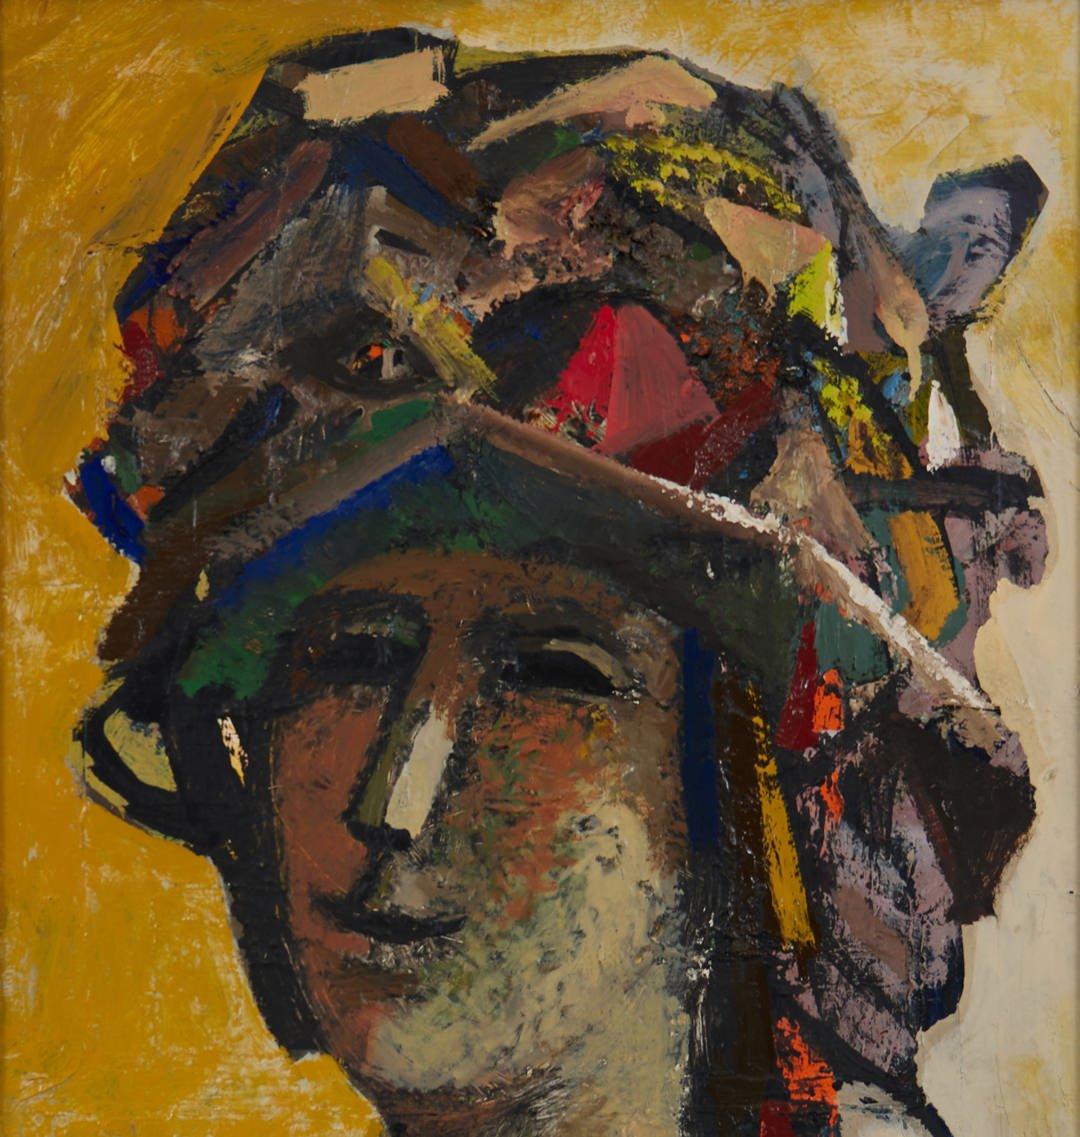 Jesus C. Vilallonga (Canadian, 1927-2018)
Femme au Chapeau
Oil on canvas
Signed lower left
24 x 16 inches
30 x 21.75 inches, framed

Jesús Carles de Vilallonga was a Spanish/Canadian figurative artist who worked primarily in the medium of egg